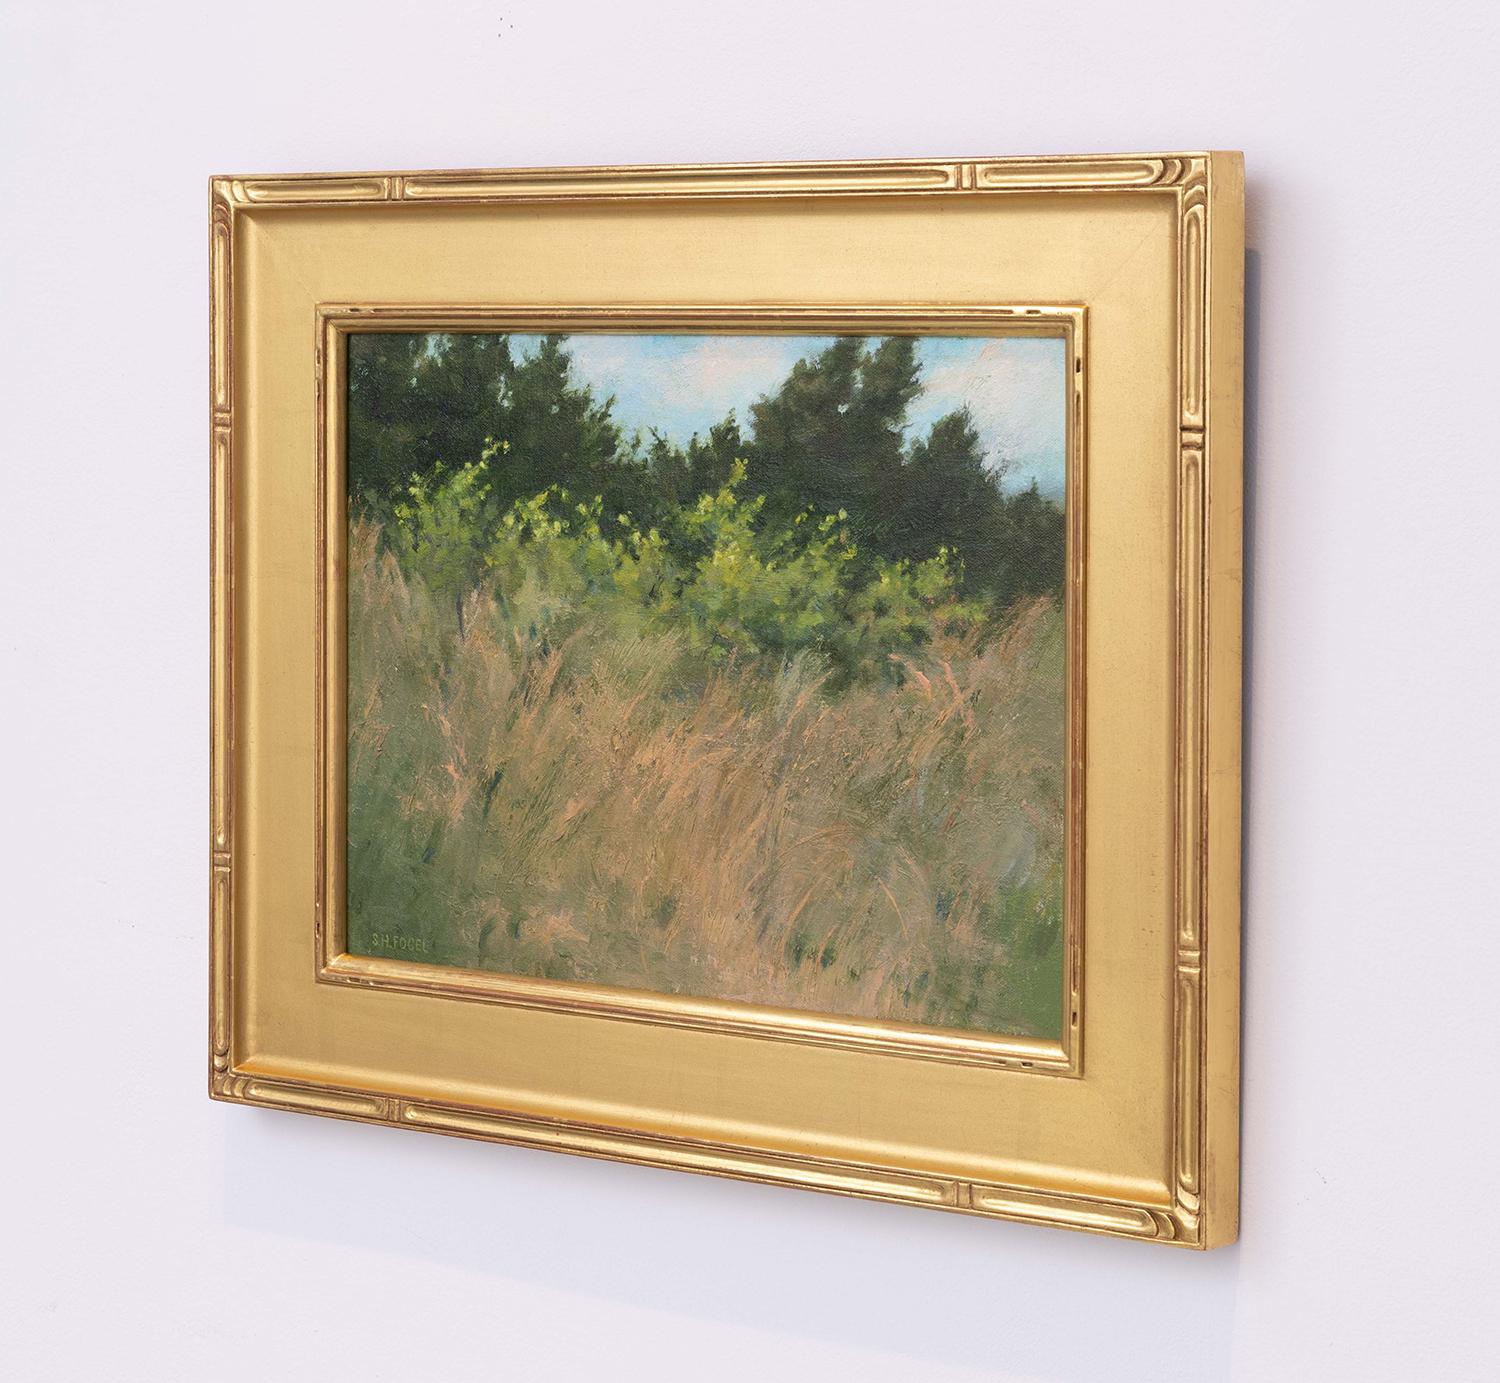 Dune Grasses (Classical Realist Oil Landscape of Beach Grasses, Gold Leaf Frame) - American Realist Painting by Susan Hope Fogel